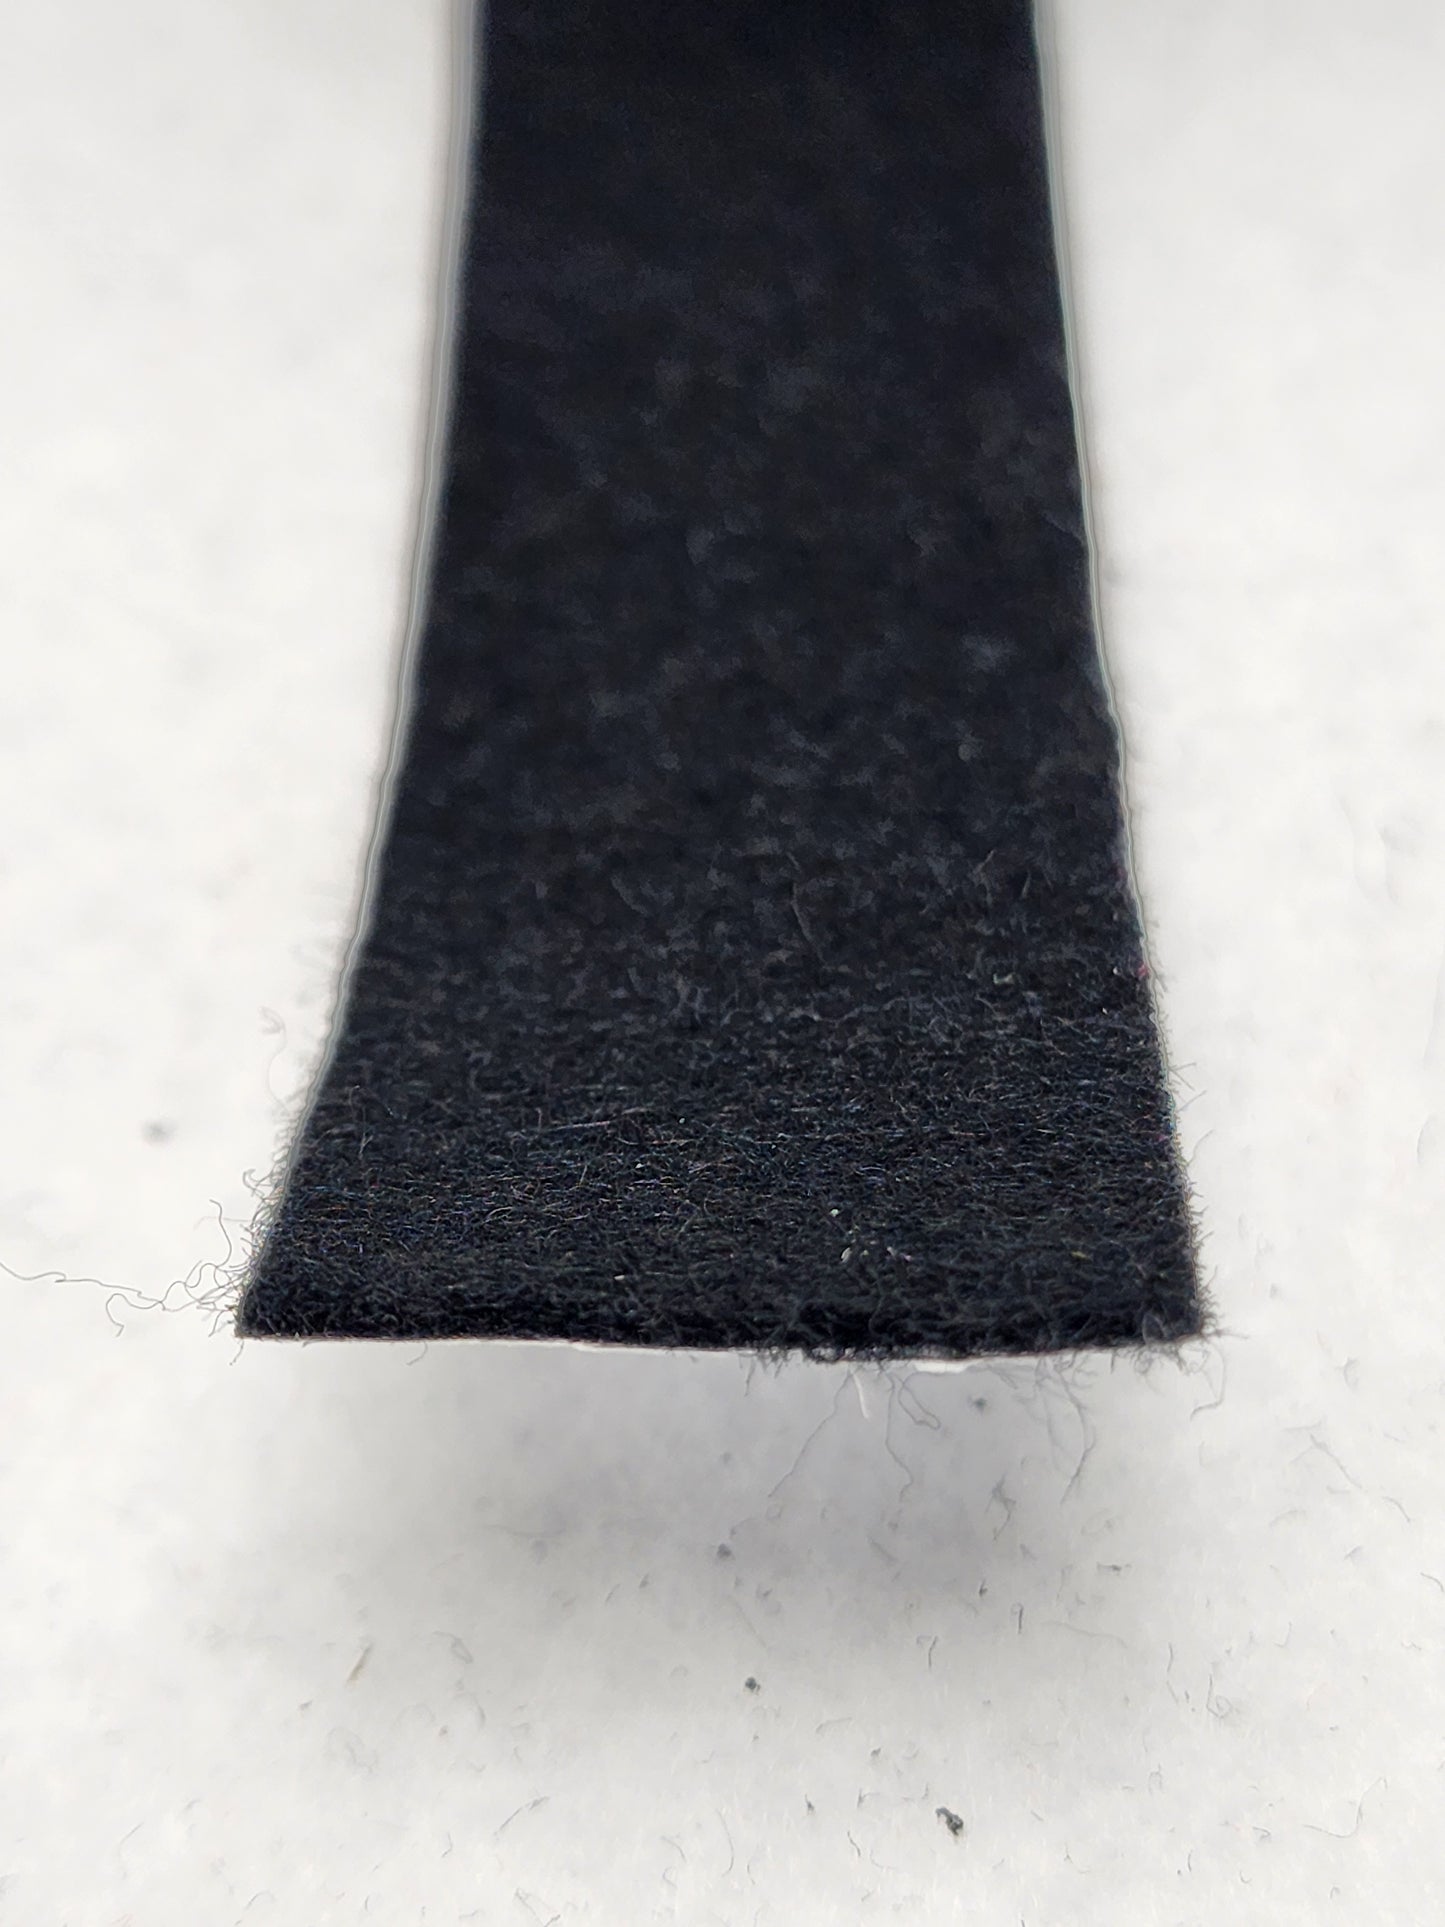 Black felt stripping with adhesive